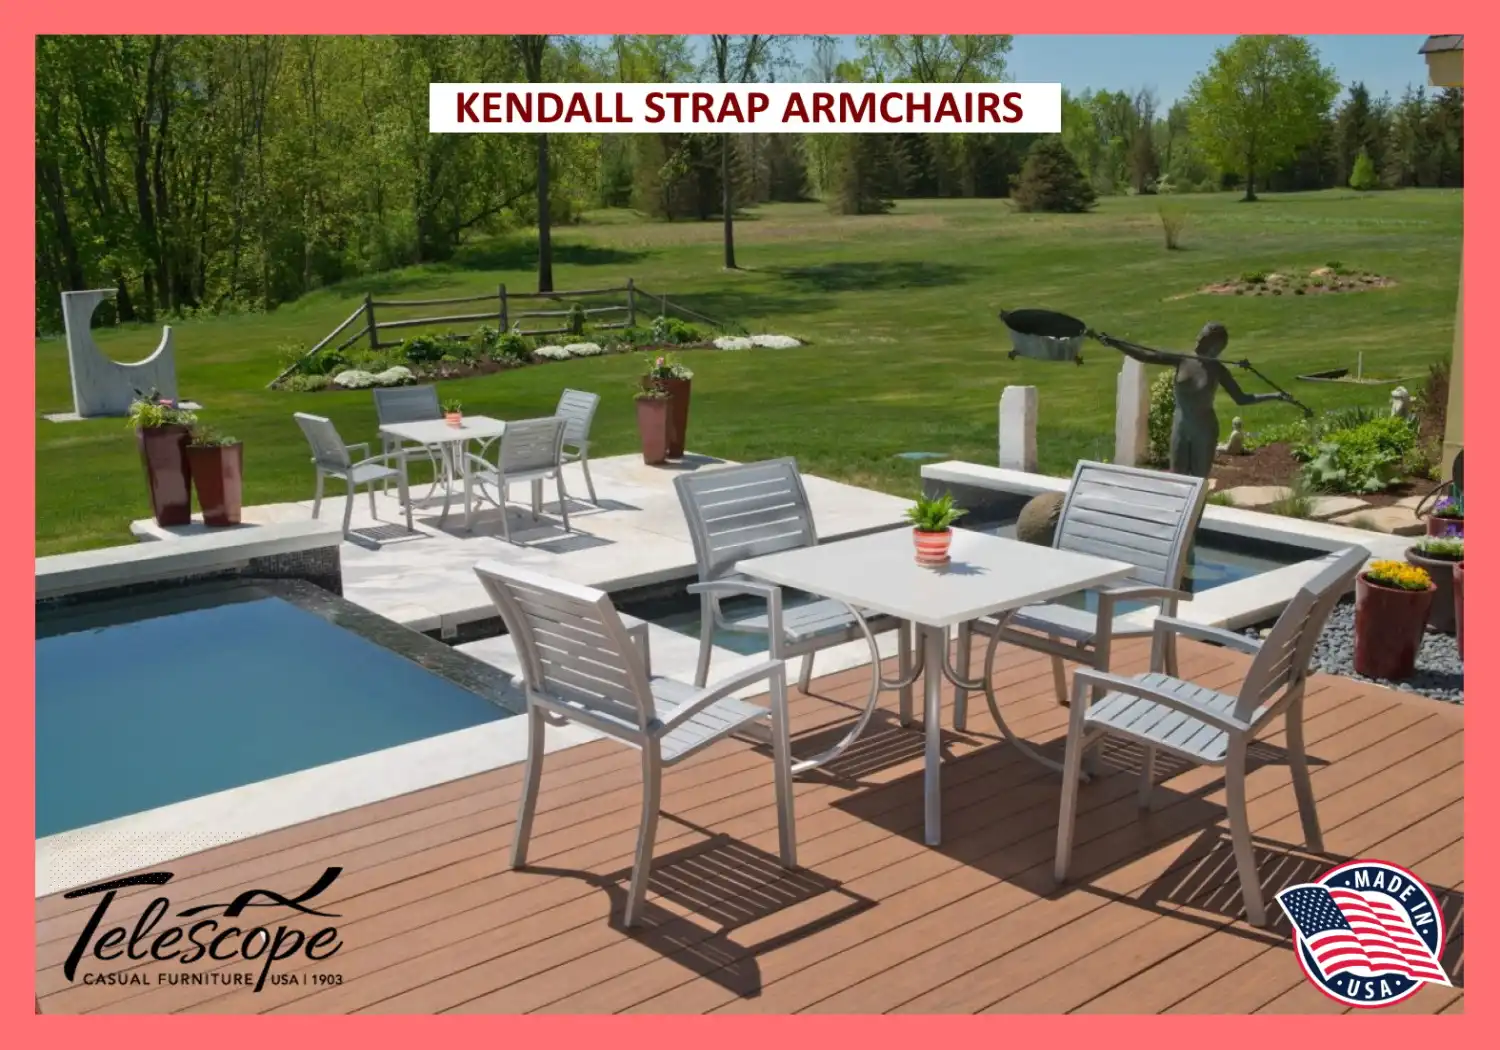 KENDALL STRAP ARMCHAIRS